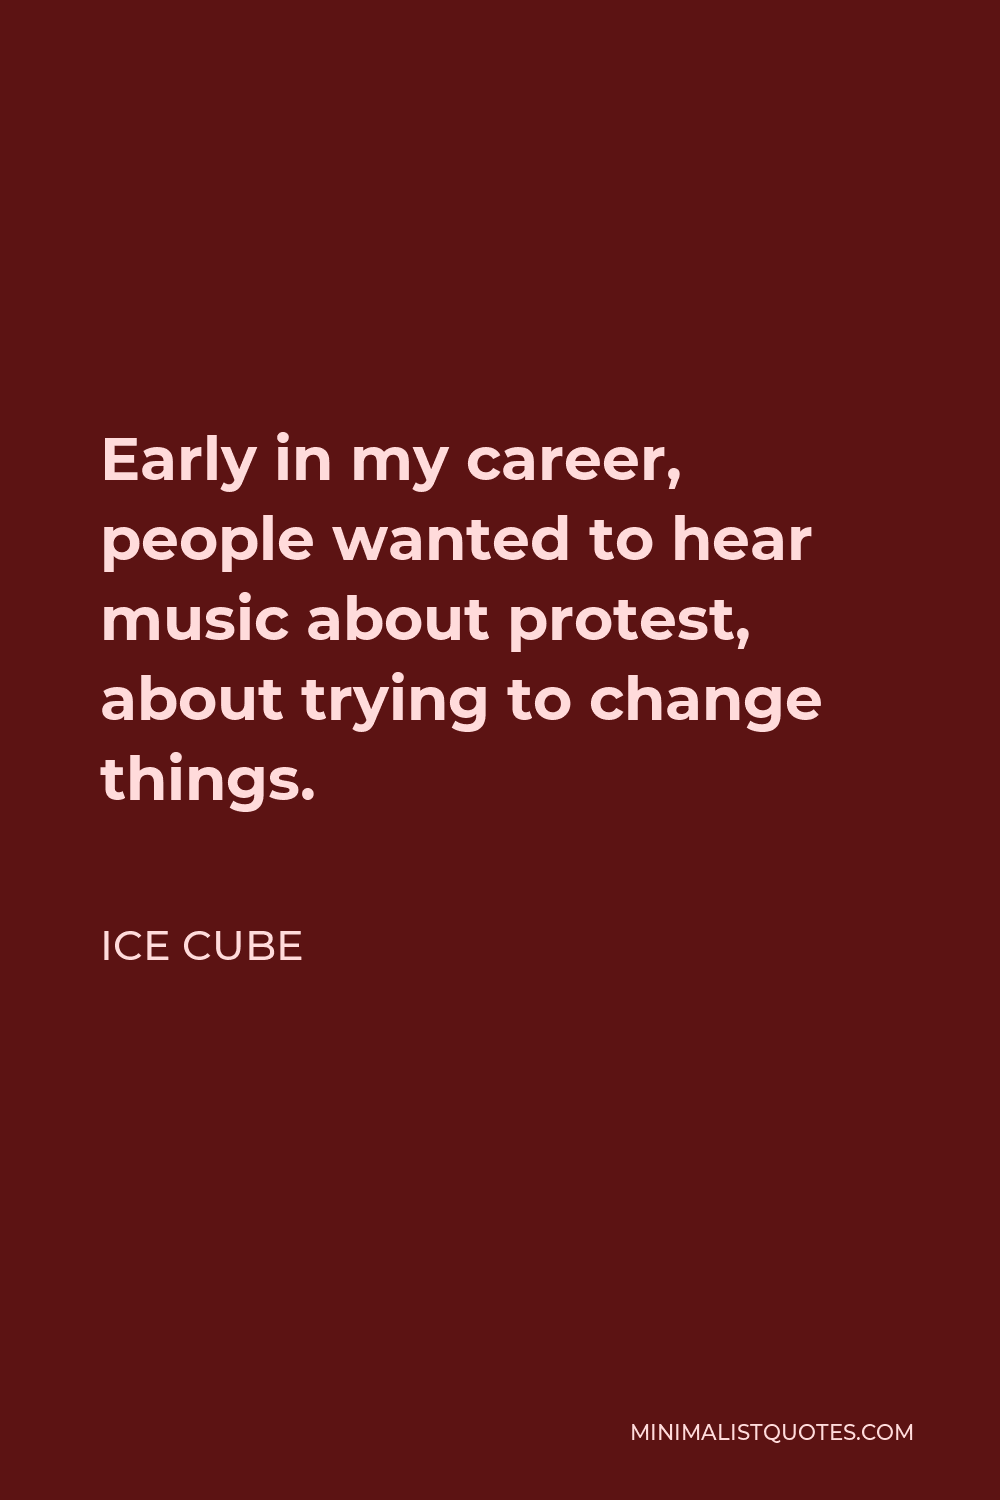 Ice Cube Quote - Early in my career, people wanted to hear music about protest, about trying to change things.